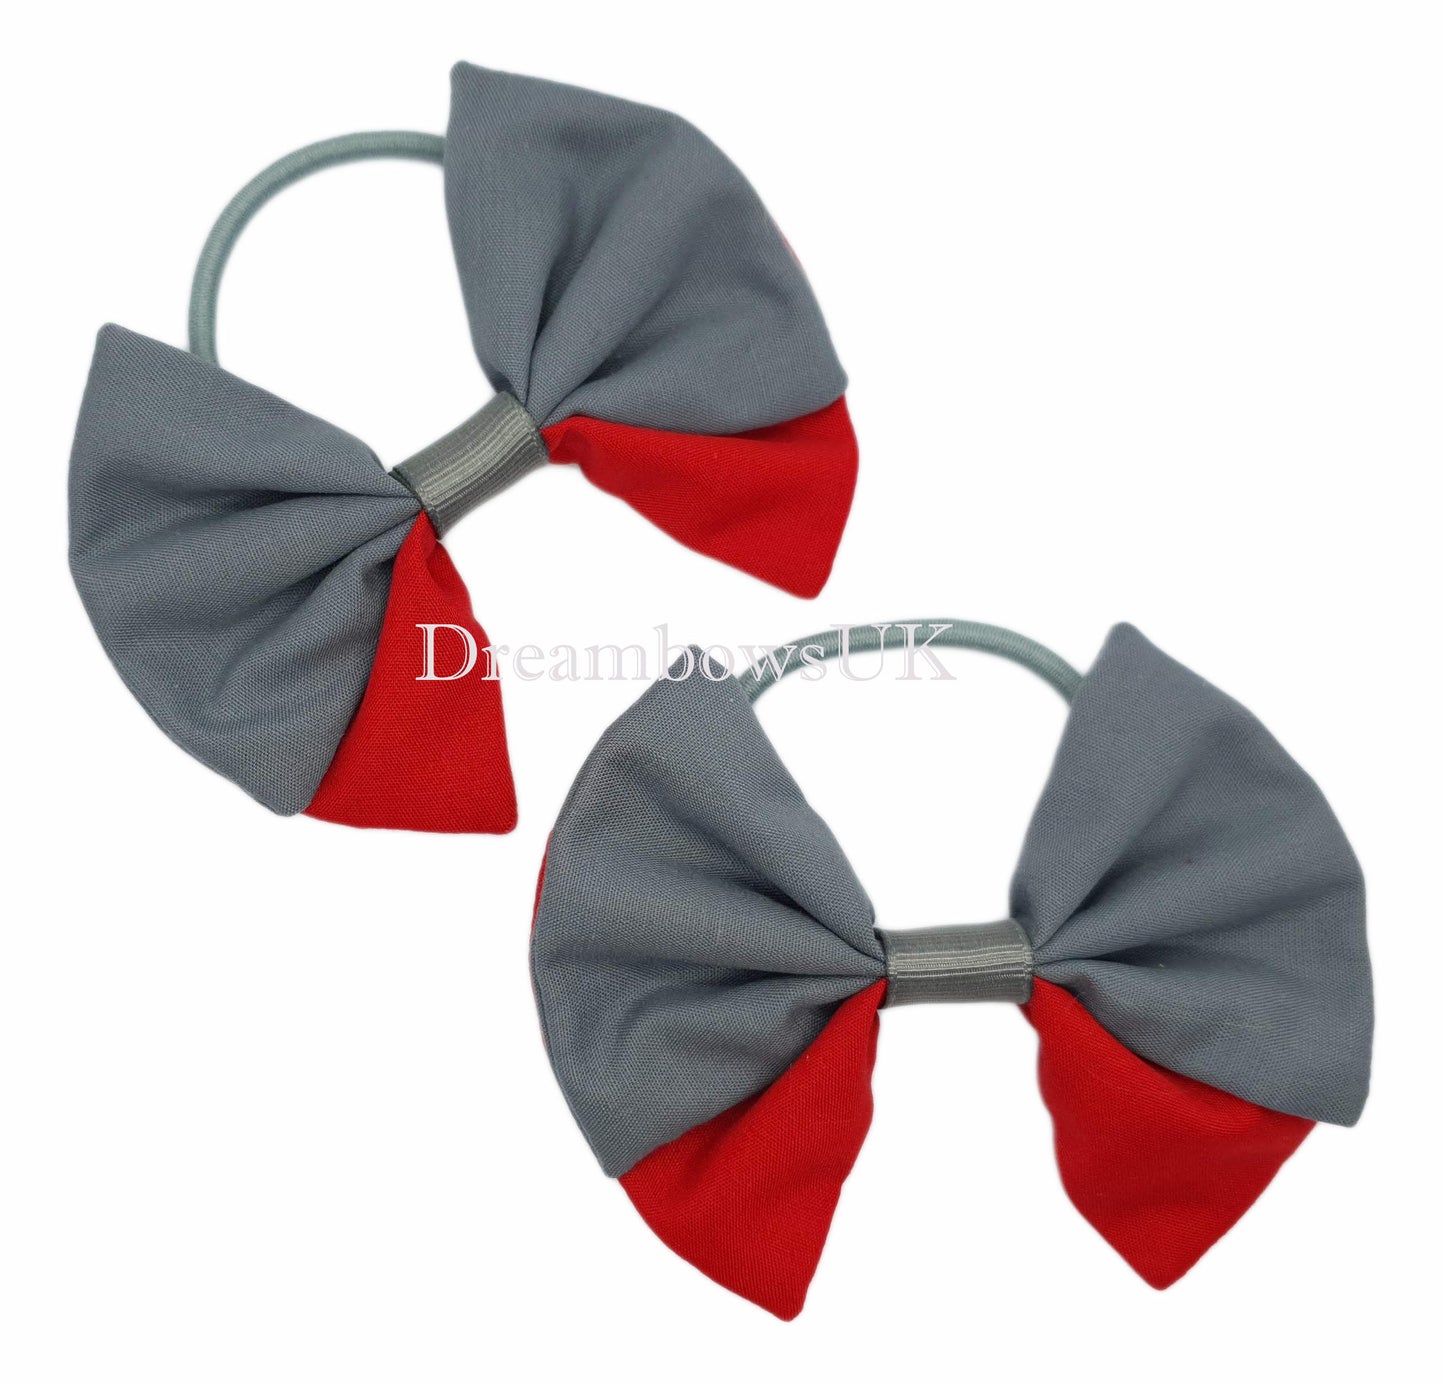 2x Grey and red fabric hair bows